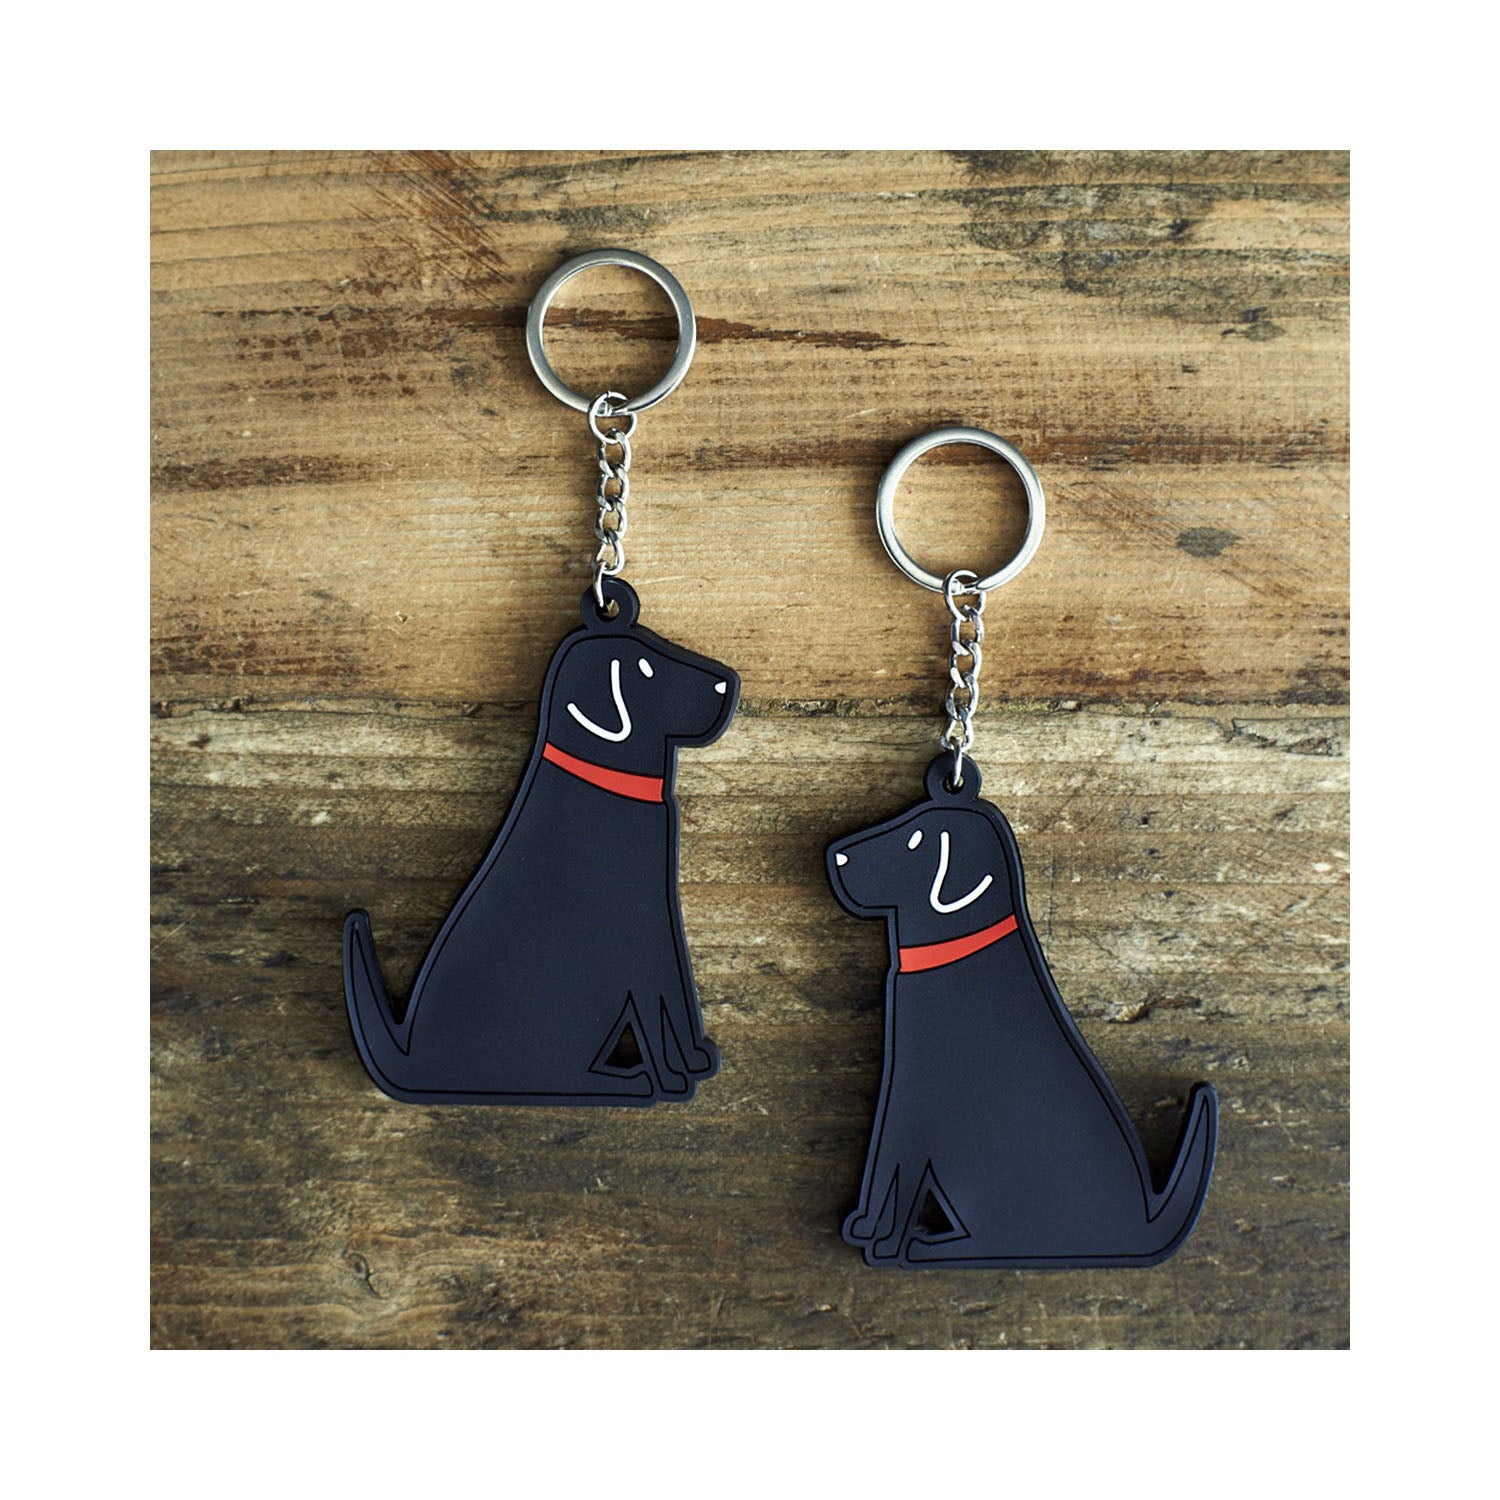 Dog Lover Gifts available at Dog Krazy Gifts - William The Black Labrador Keyring by Sweet William - part of the Labrador collection of Dog Lovers Gifts available from Dog Krazy Gifts